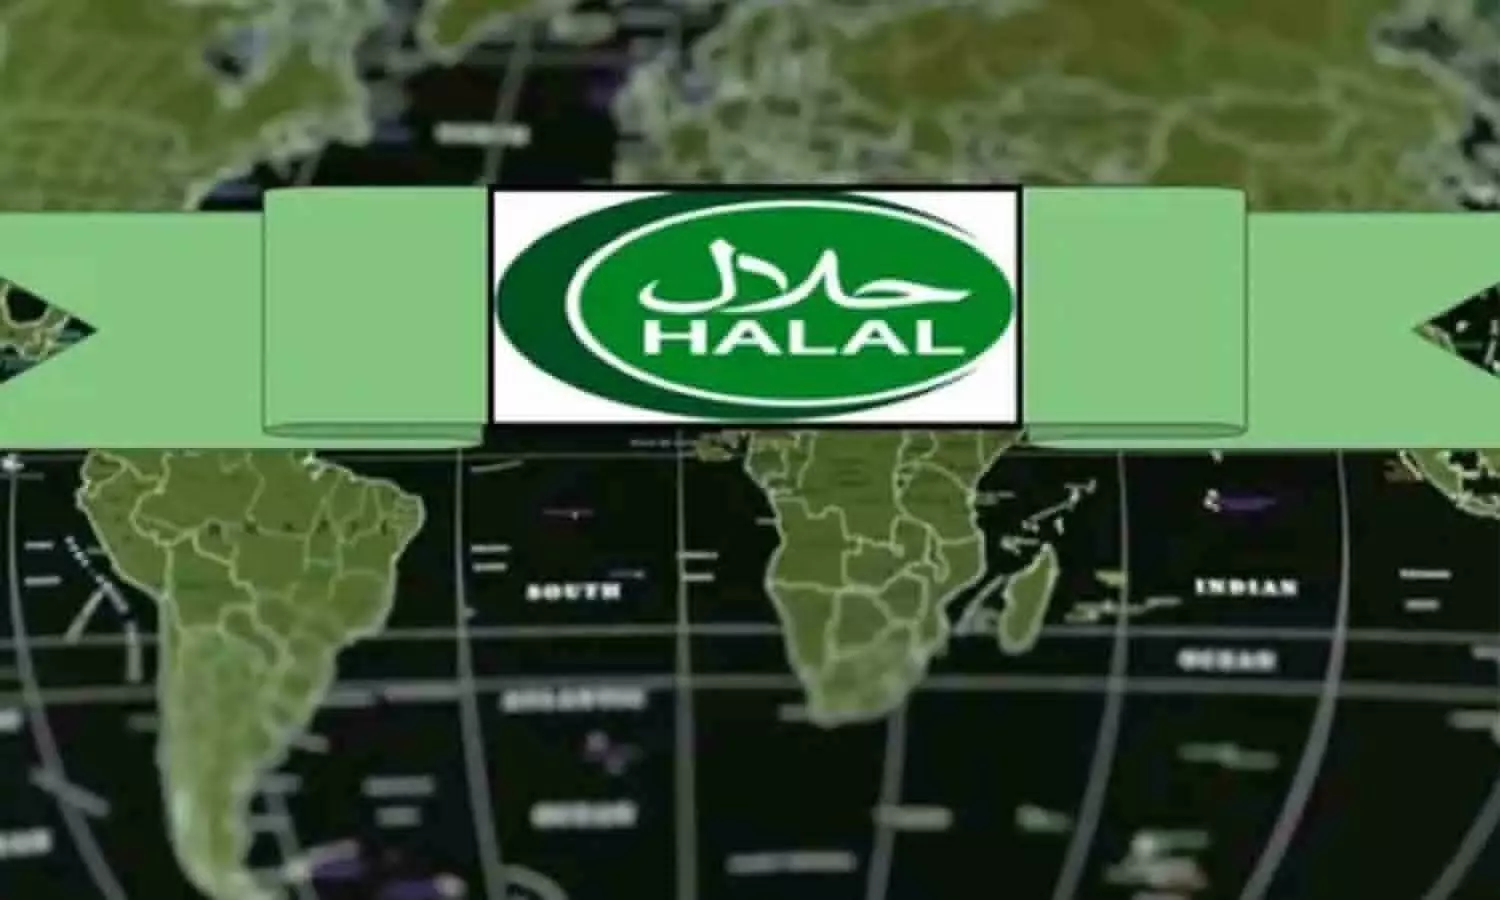 After the hijab controversy in Karnataka, a controversy has arisen over halal meat.